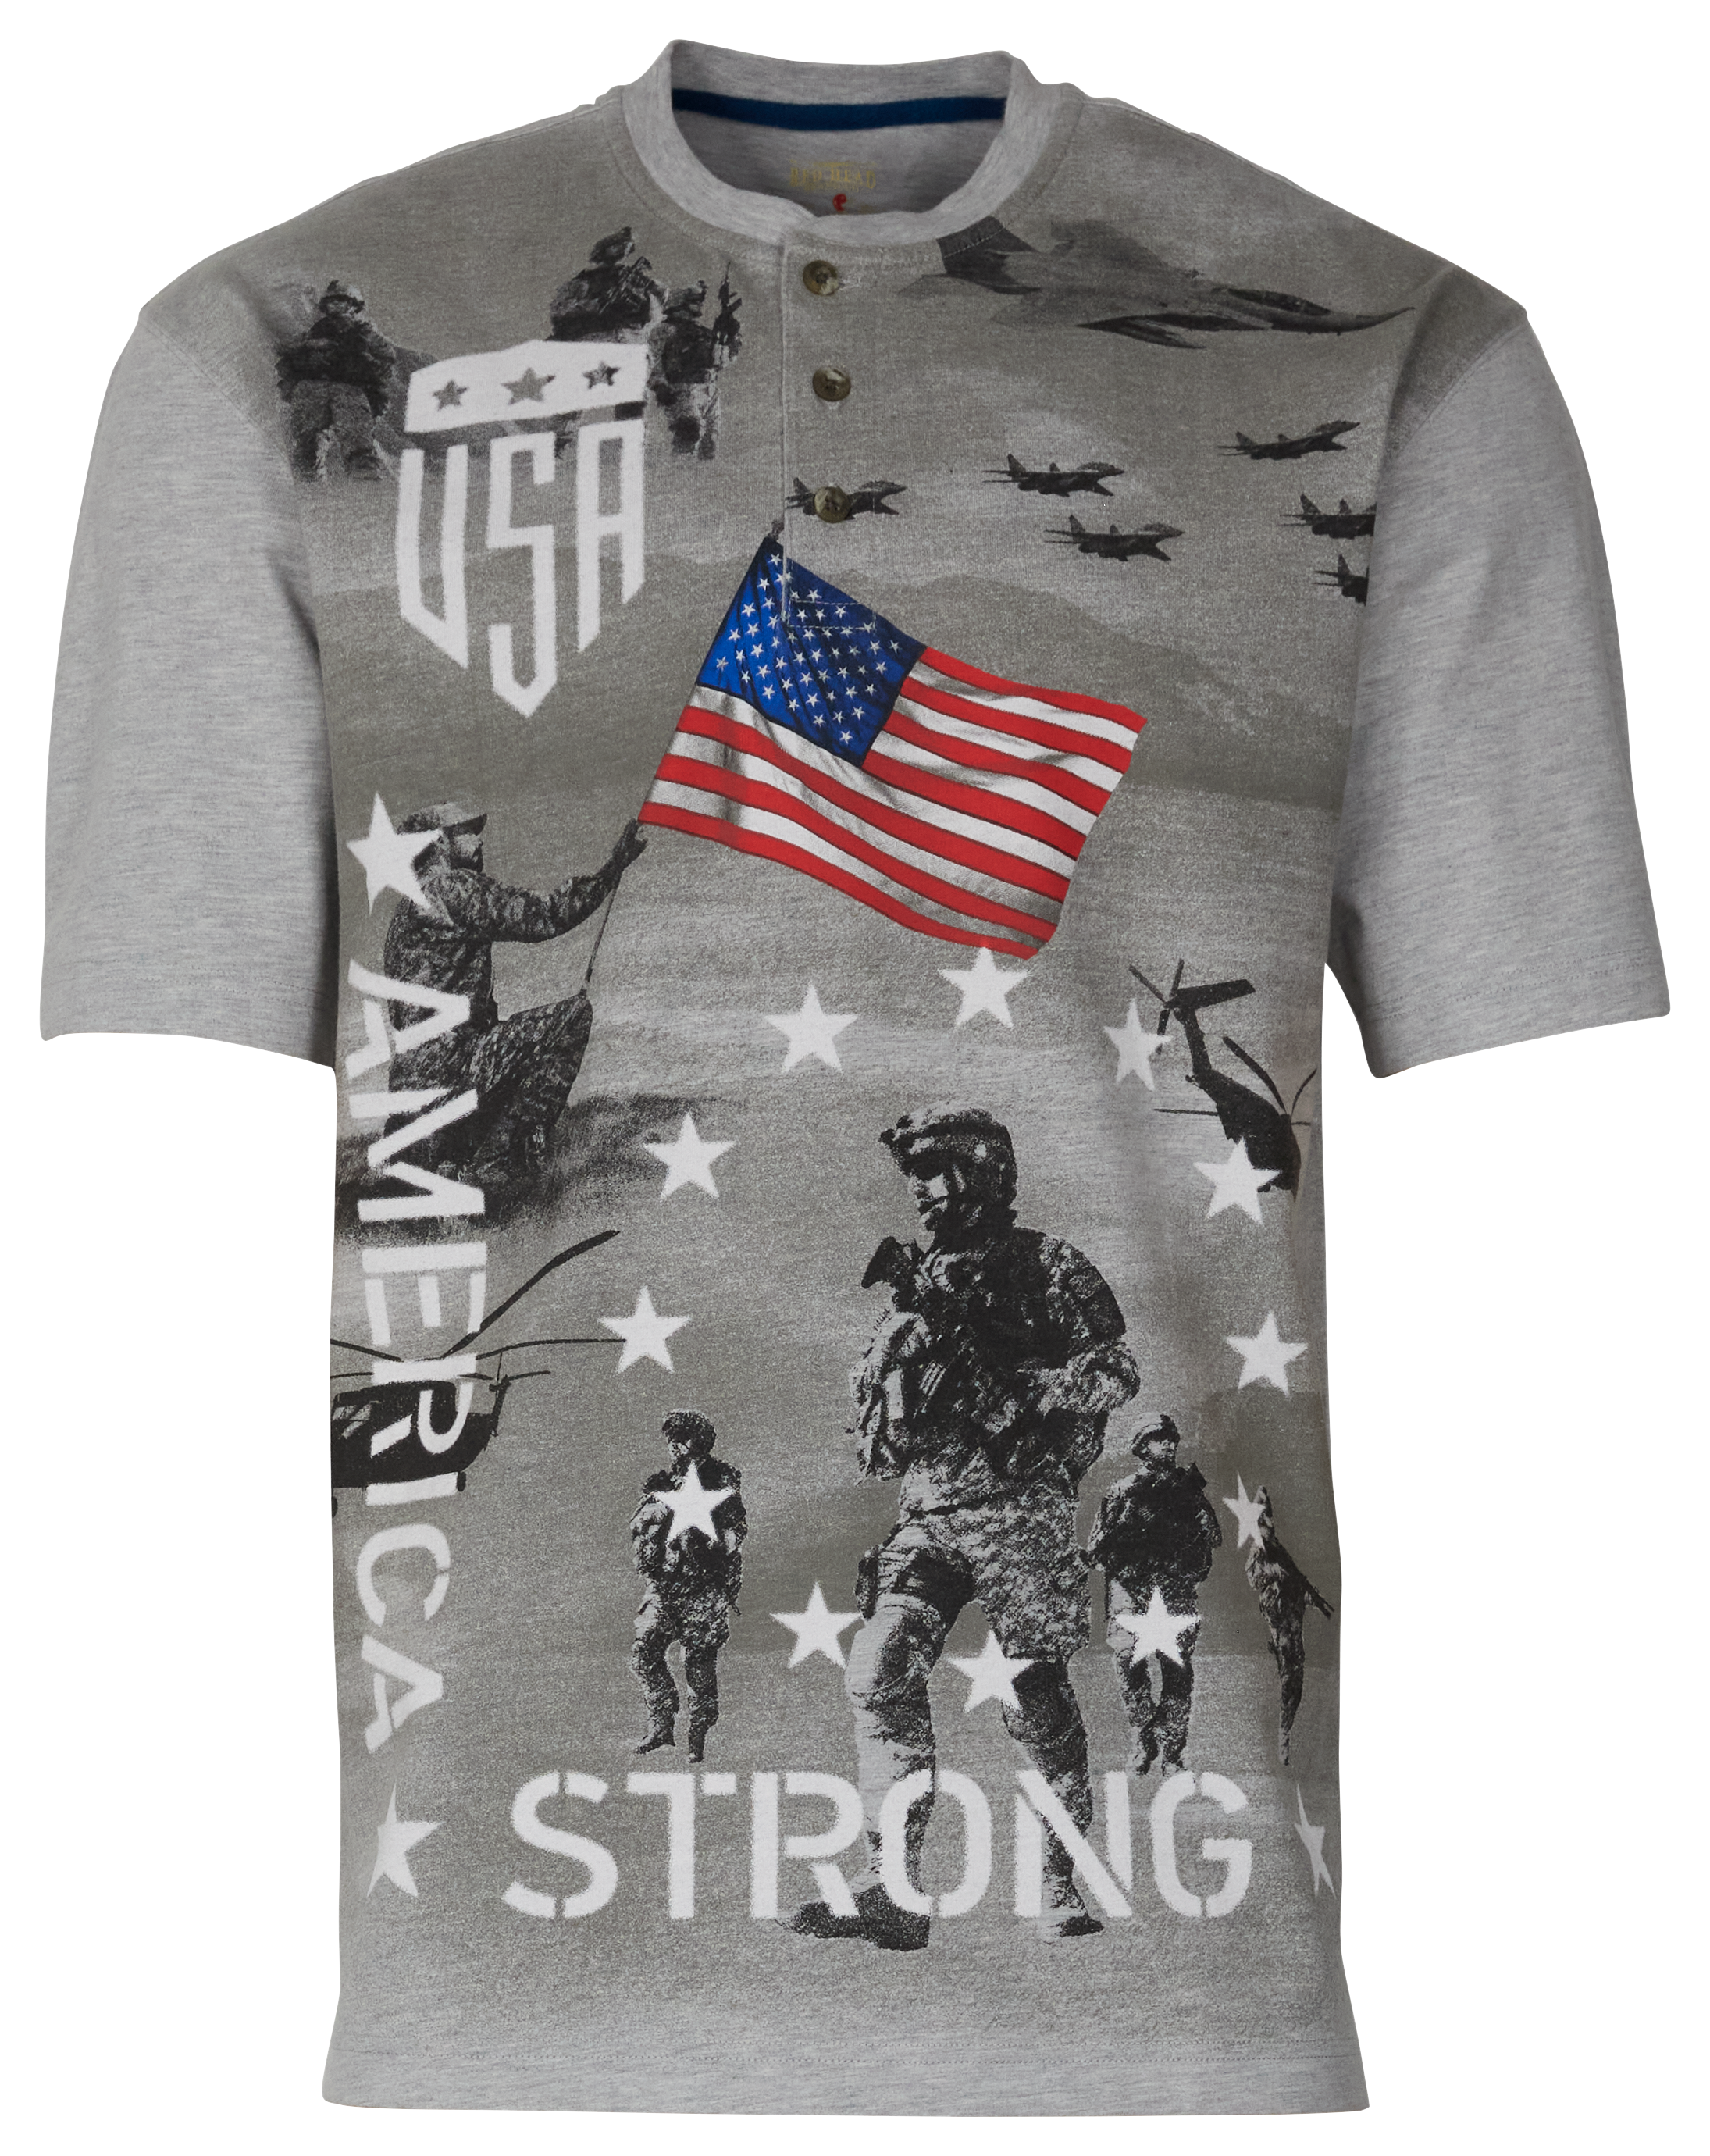 Hoodie USA Flag Bass Long Sleeve Performance Shirt - Made in the USA – Tops  & Tails Boutique